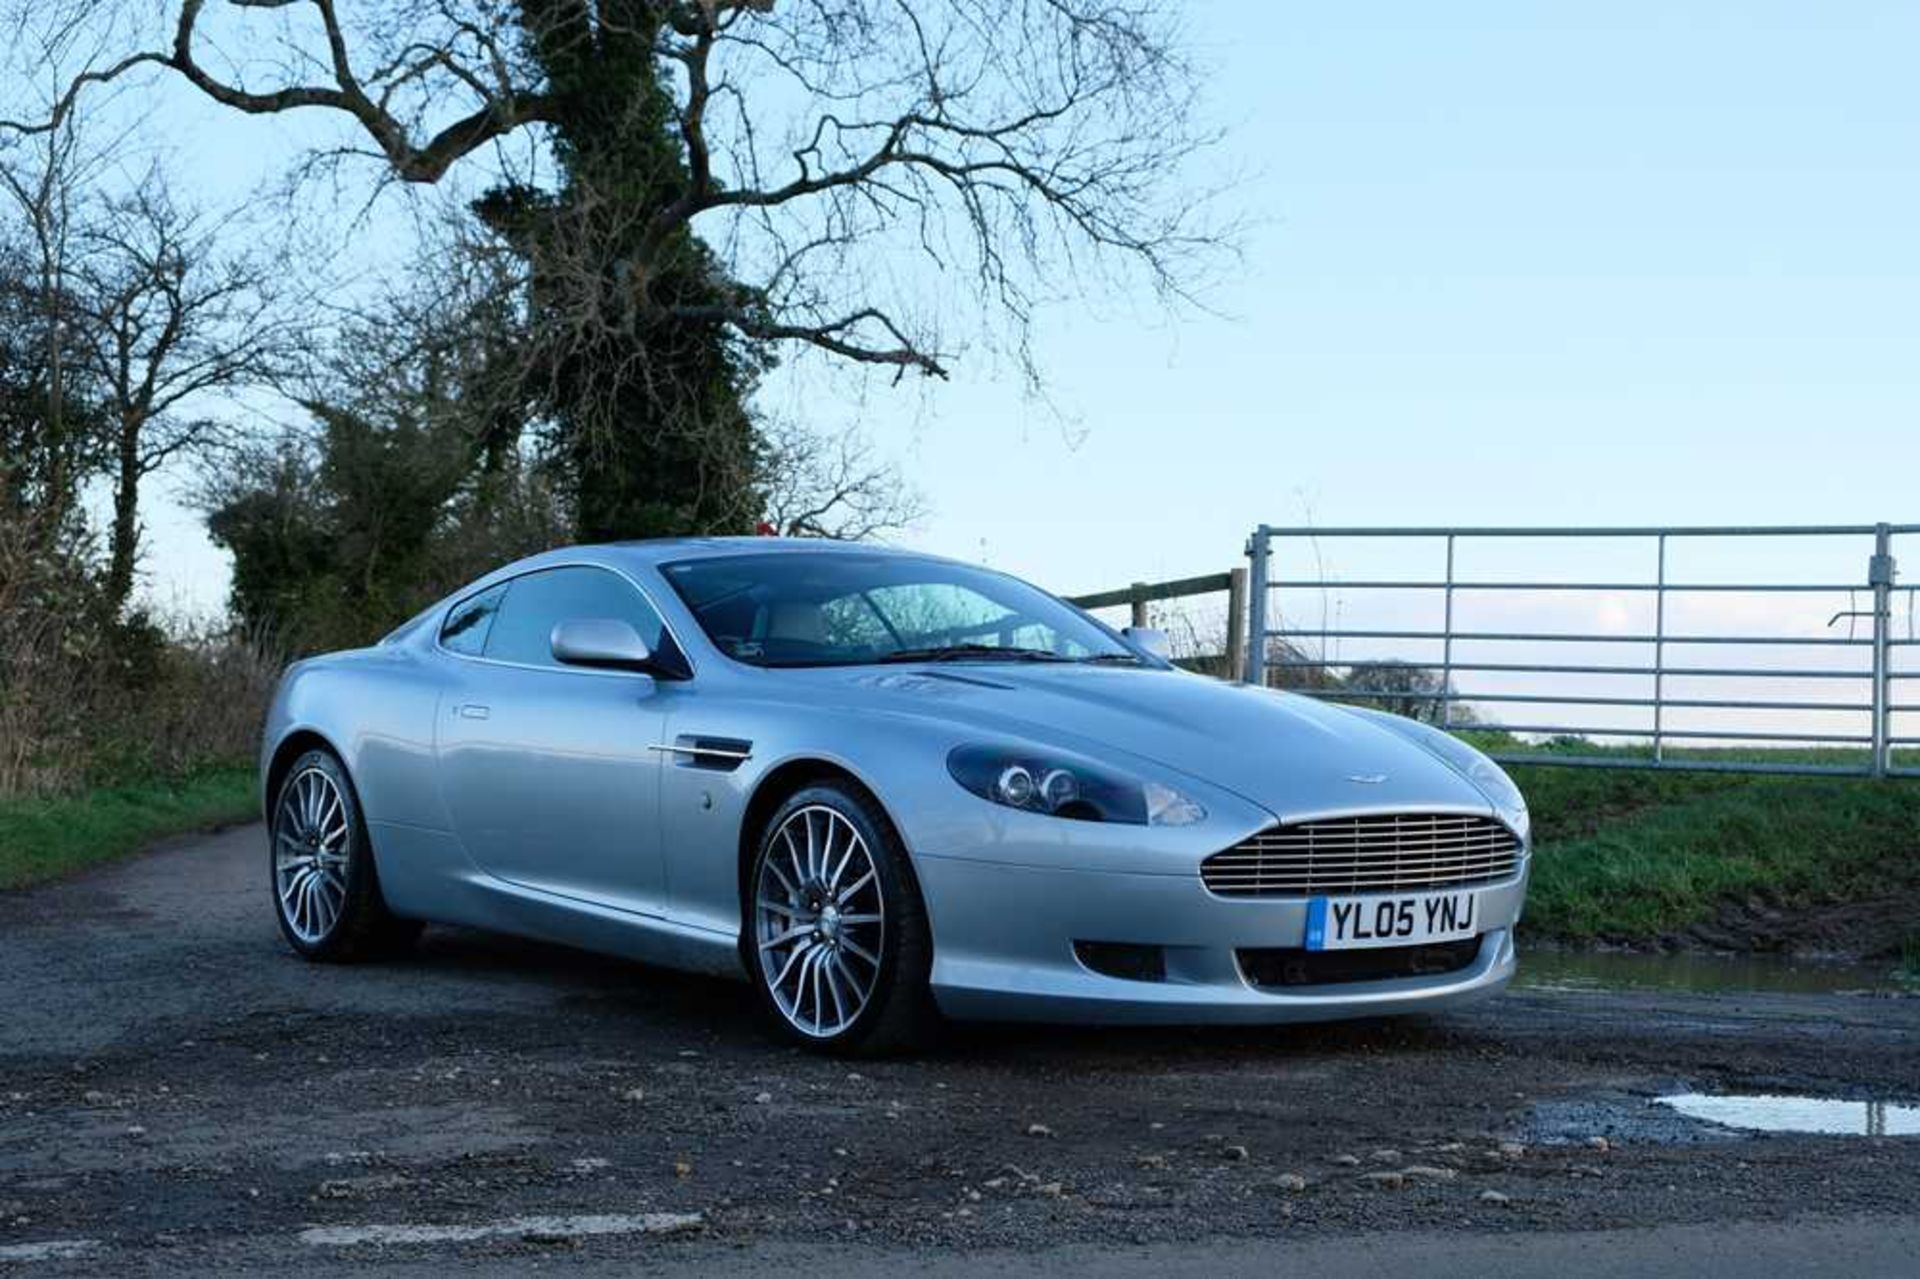 2005 Aston Martin DB9 c.25,000 from new and 4 former keepers - Image 7 of 59